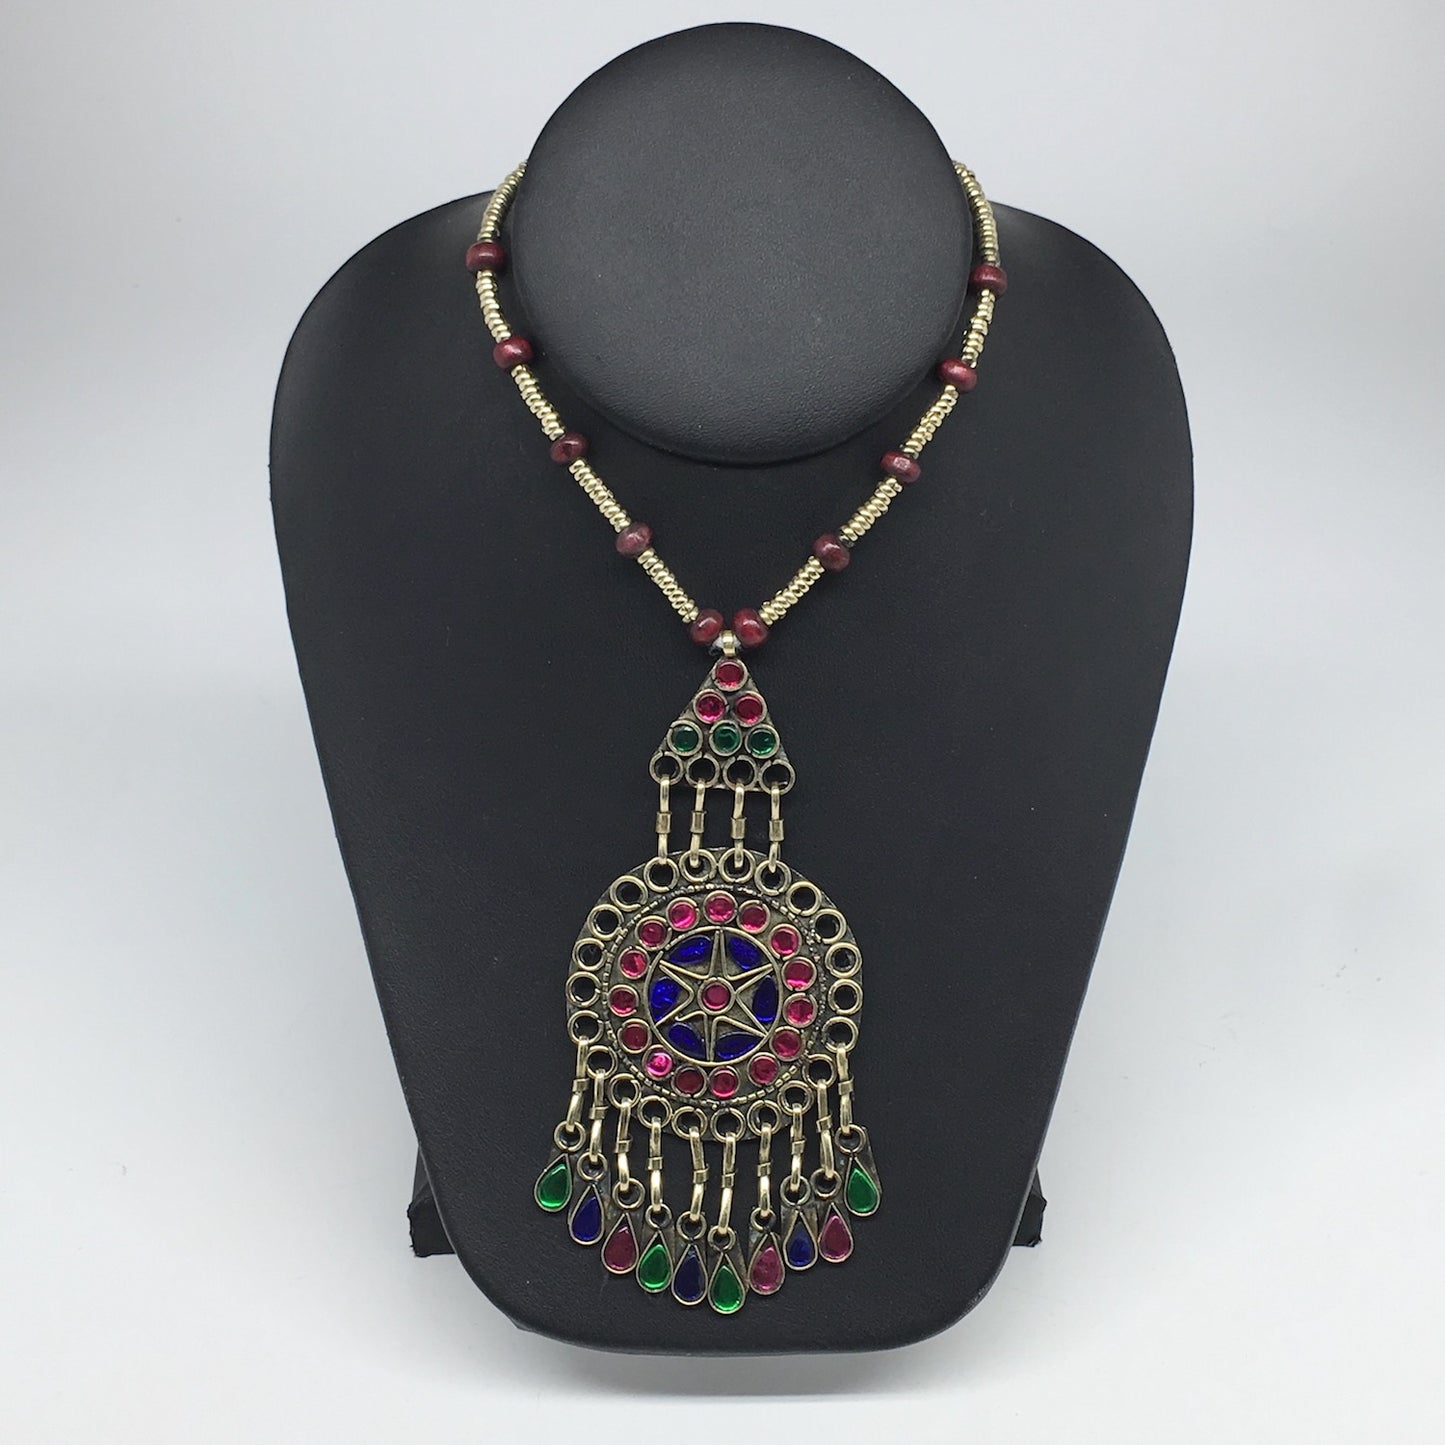 Kuchi Necklace Afghan Tribal Fashion Colorful Glass ATS Necktie Necklace, KN383